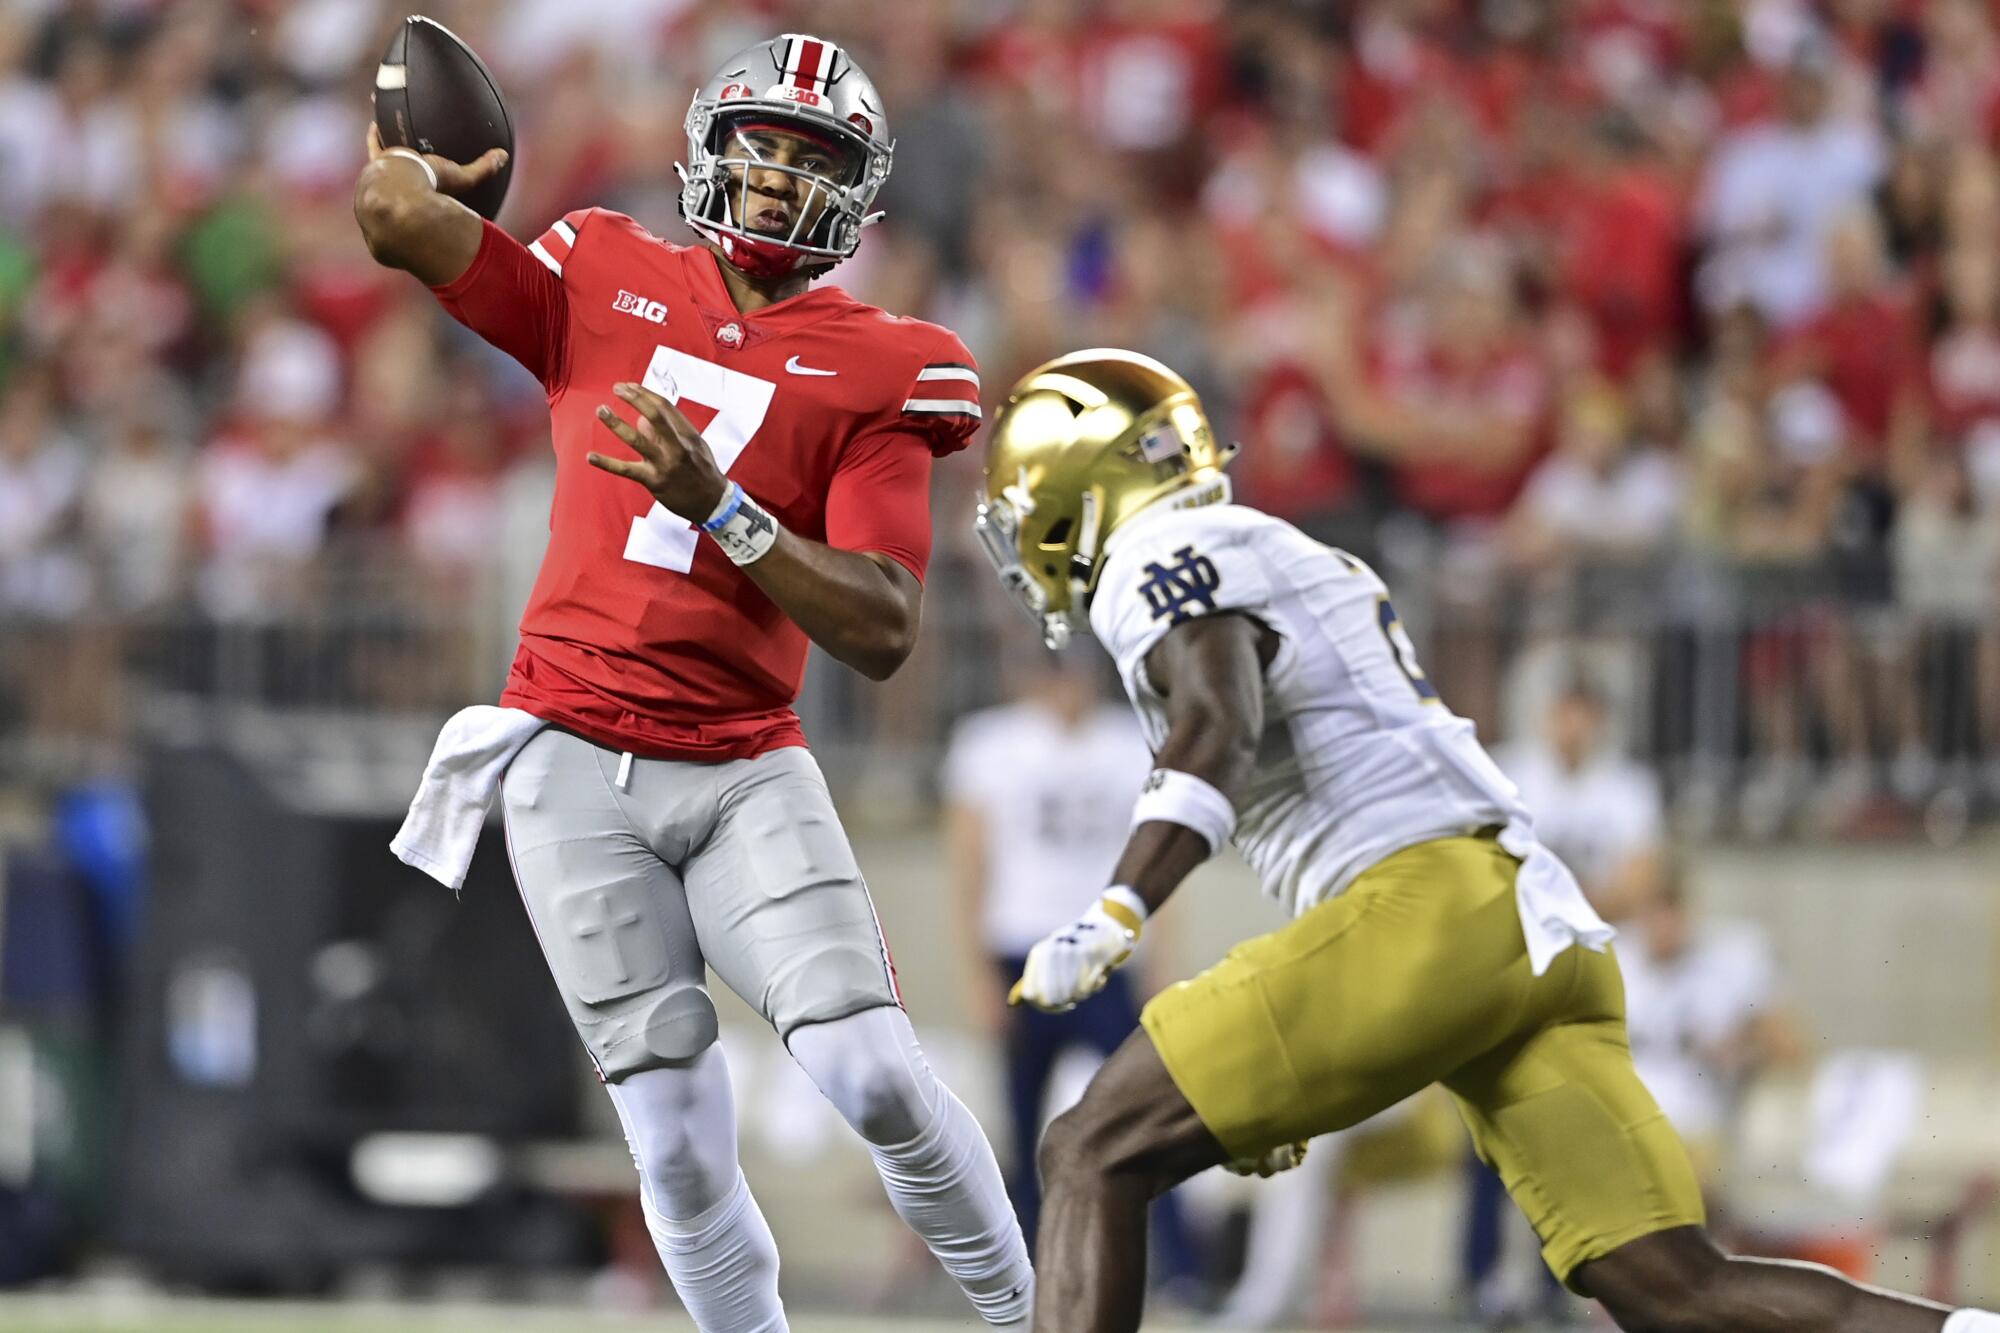 CJ Stroud jumps to throw a pass for Ohio State.